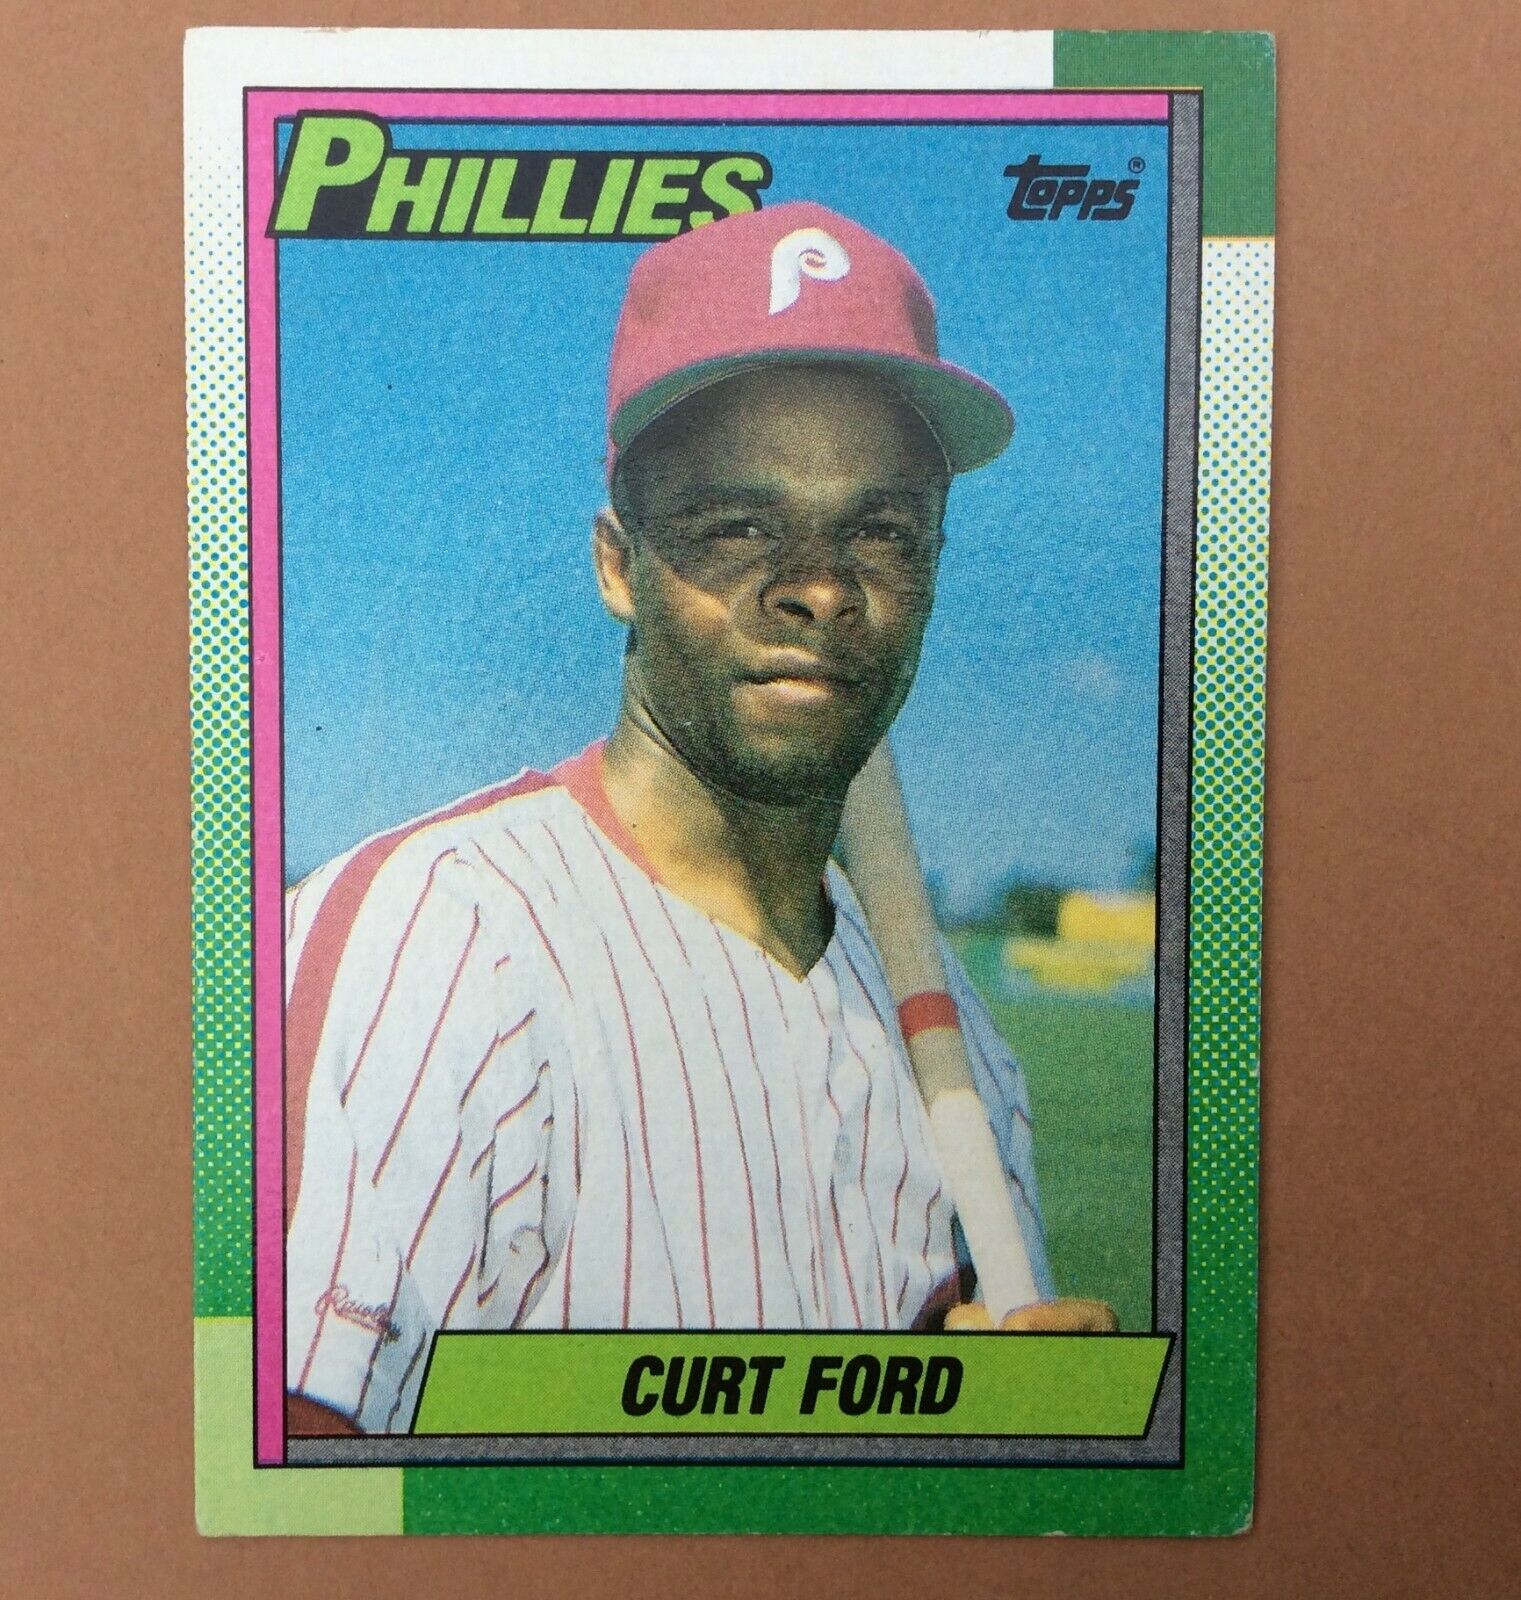 1990 TOPPS #39 CURT FORD PHILLIES BASEBALL CARD Trading Card